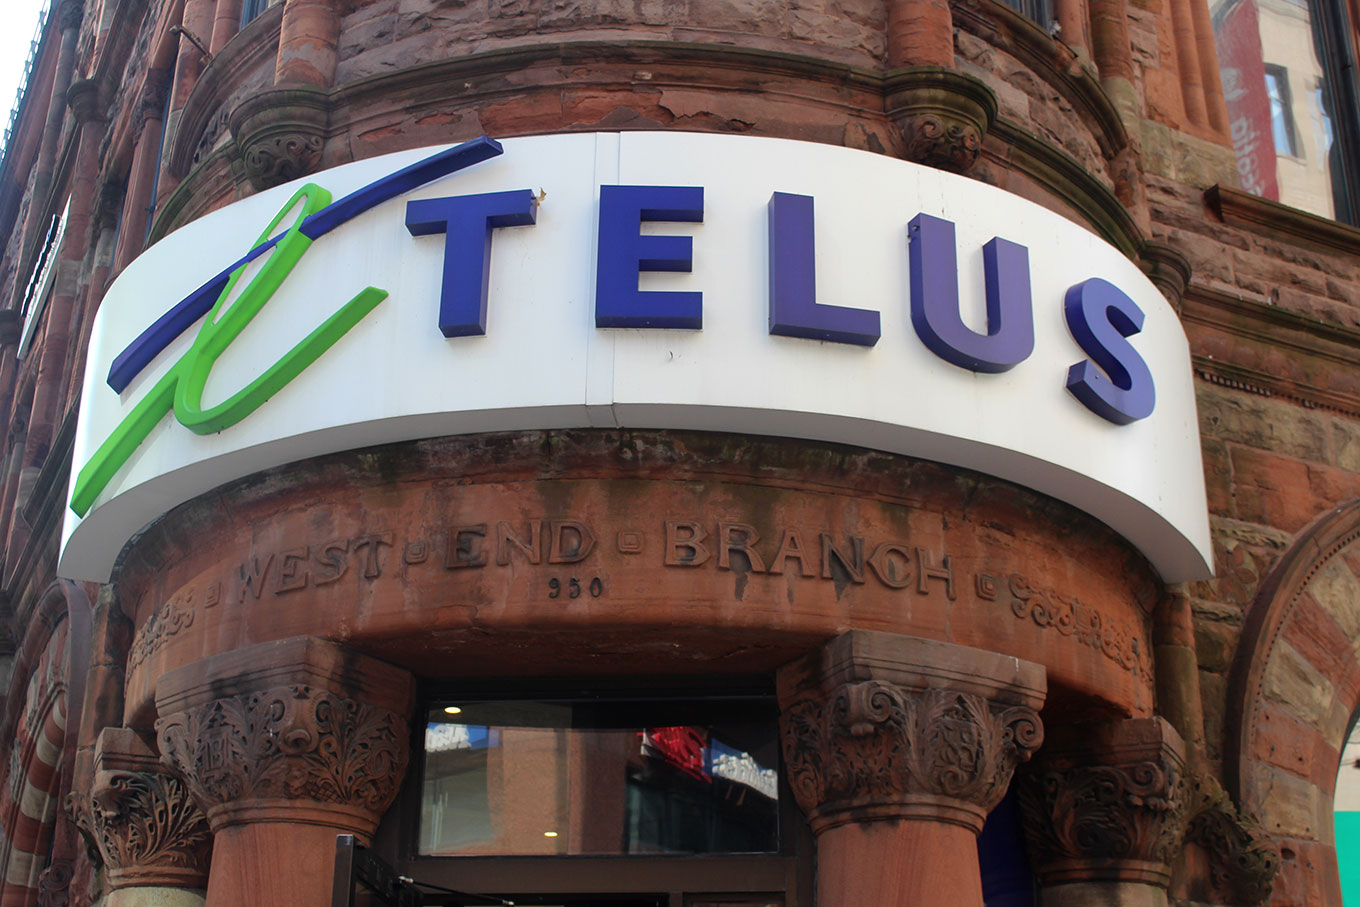 Laminated raparound Telus signage covers the original art-nouveau lettering above the door of what was formerly the Bank of Montreal.